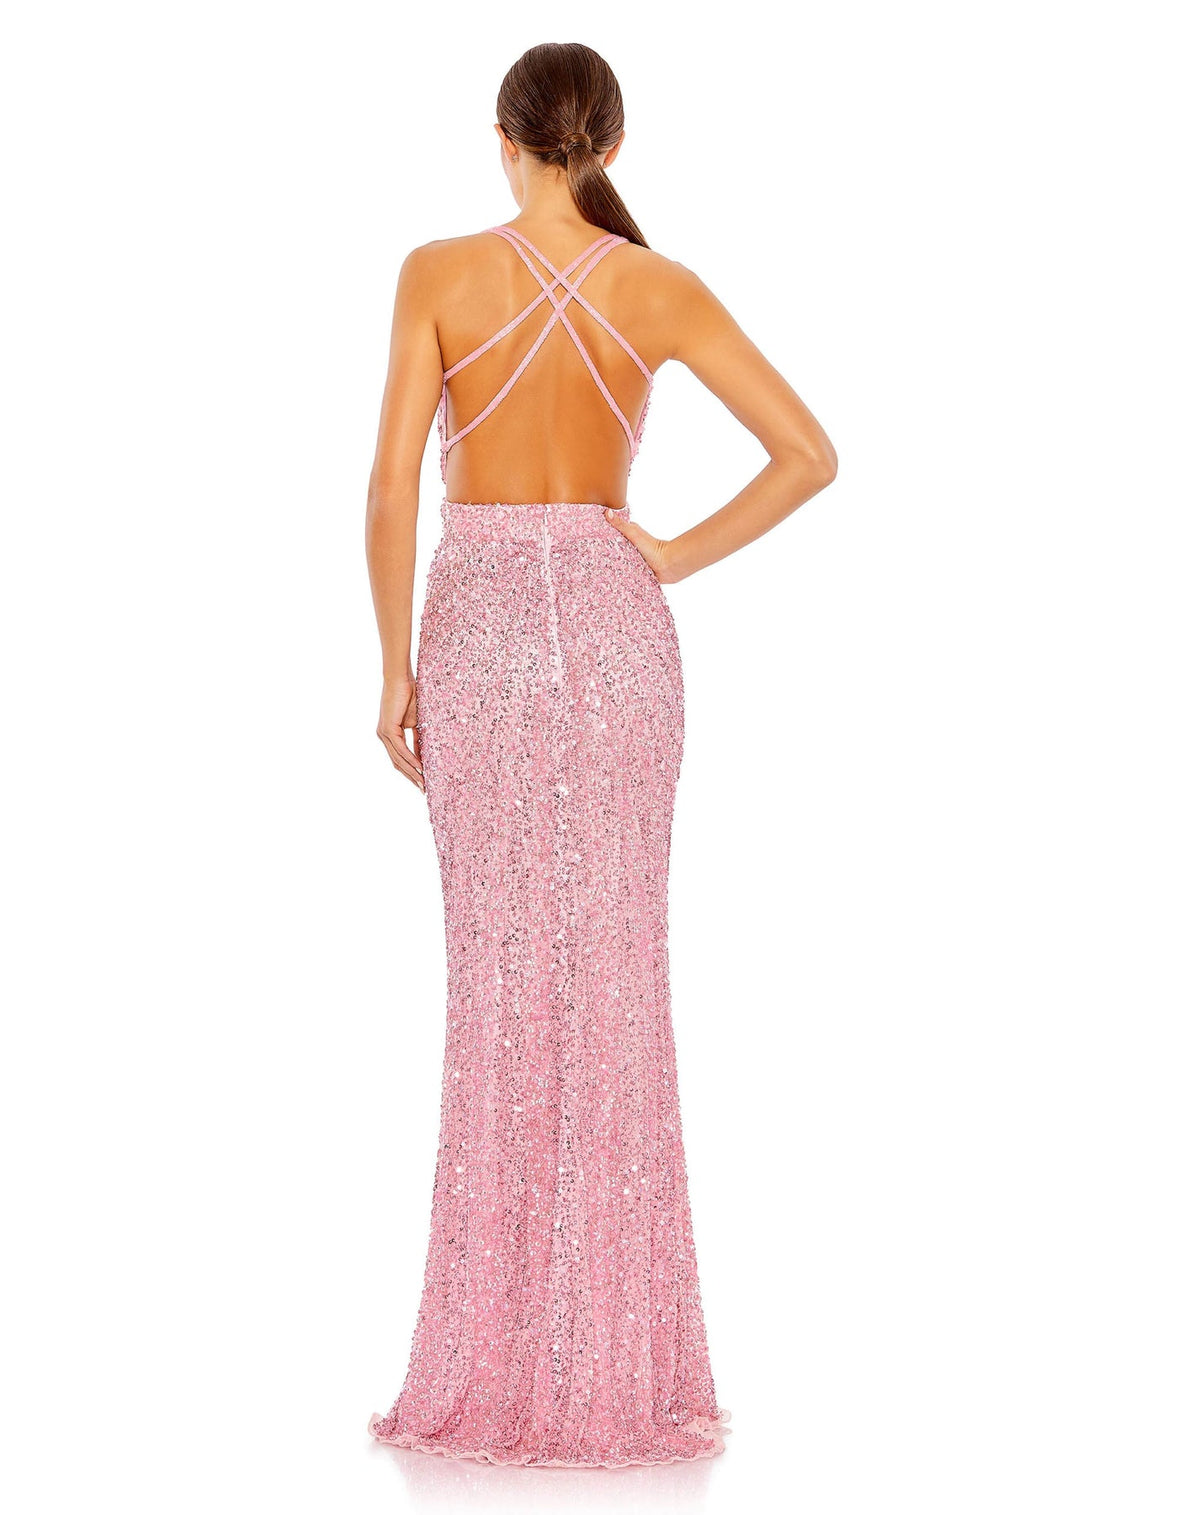 Criss cross cut out sequin gown - Pink * Style #5686 * Designer: Mac Duggal back view